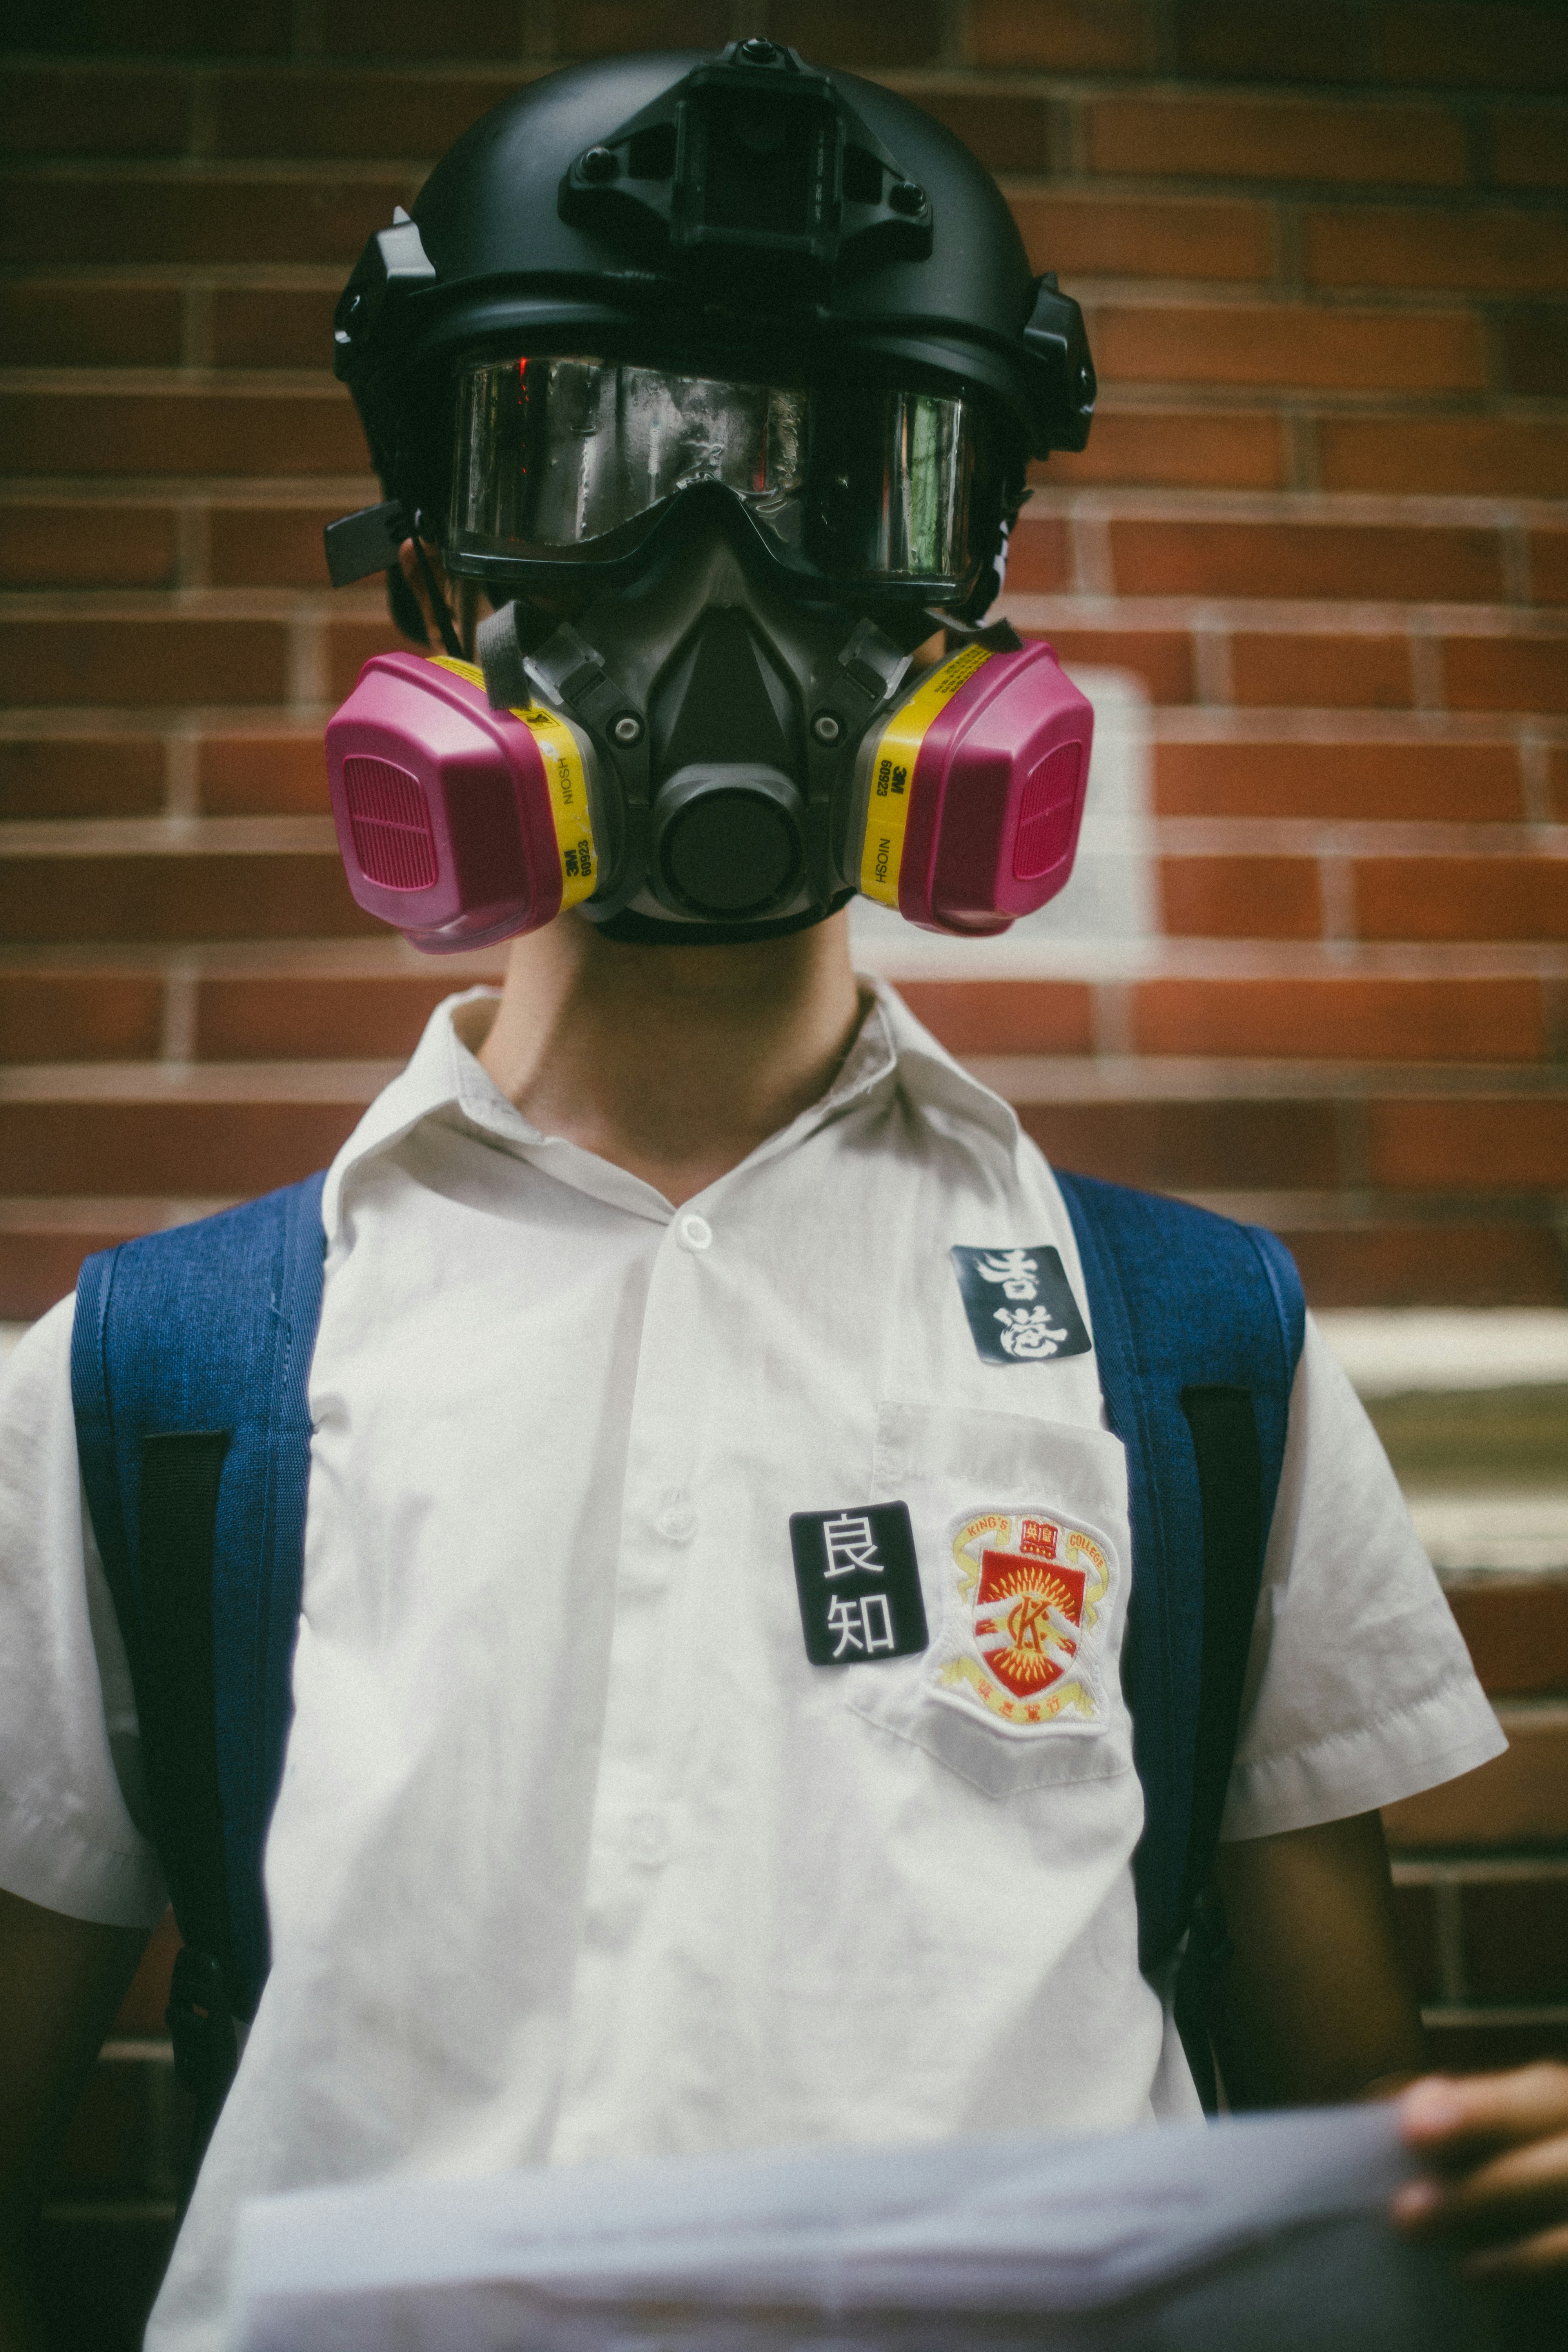 After a summer of demonstrating in the streets, high school students in Hong Kong starting the new school year on Monday arrived to class wearing gas masks and joined hands to form human chains. Stickers on the shirt read 'Hong Kong' and 'conscience' demanding a call for universal suffrage in Hong Kong and an independent inquiry into accusations of police brutality - September 2019